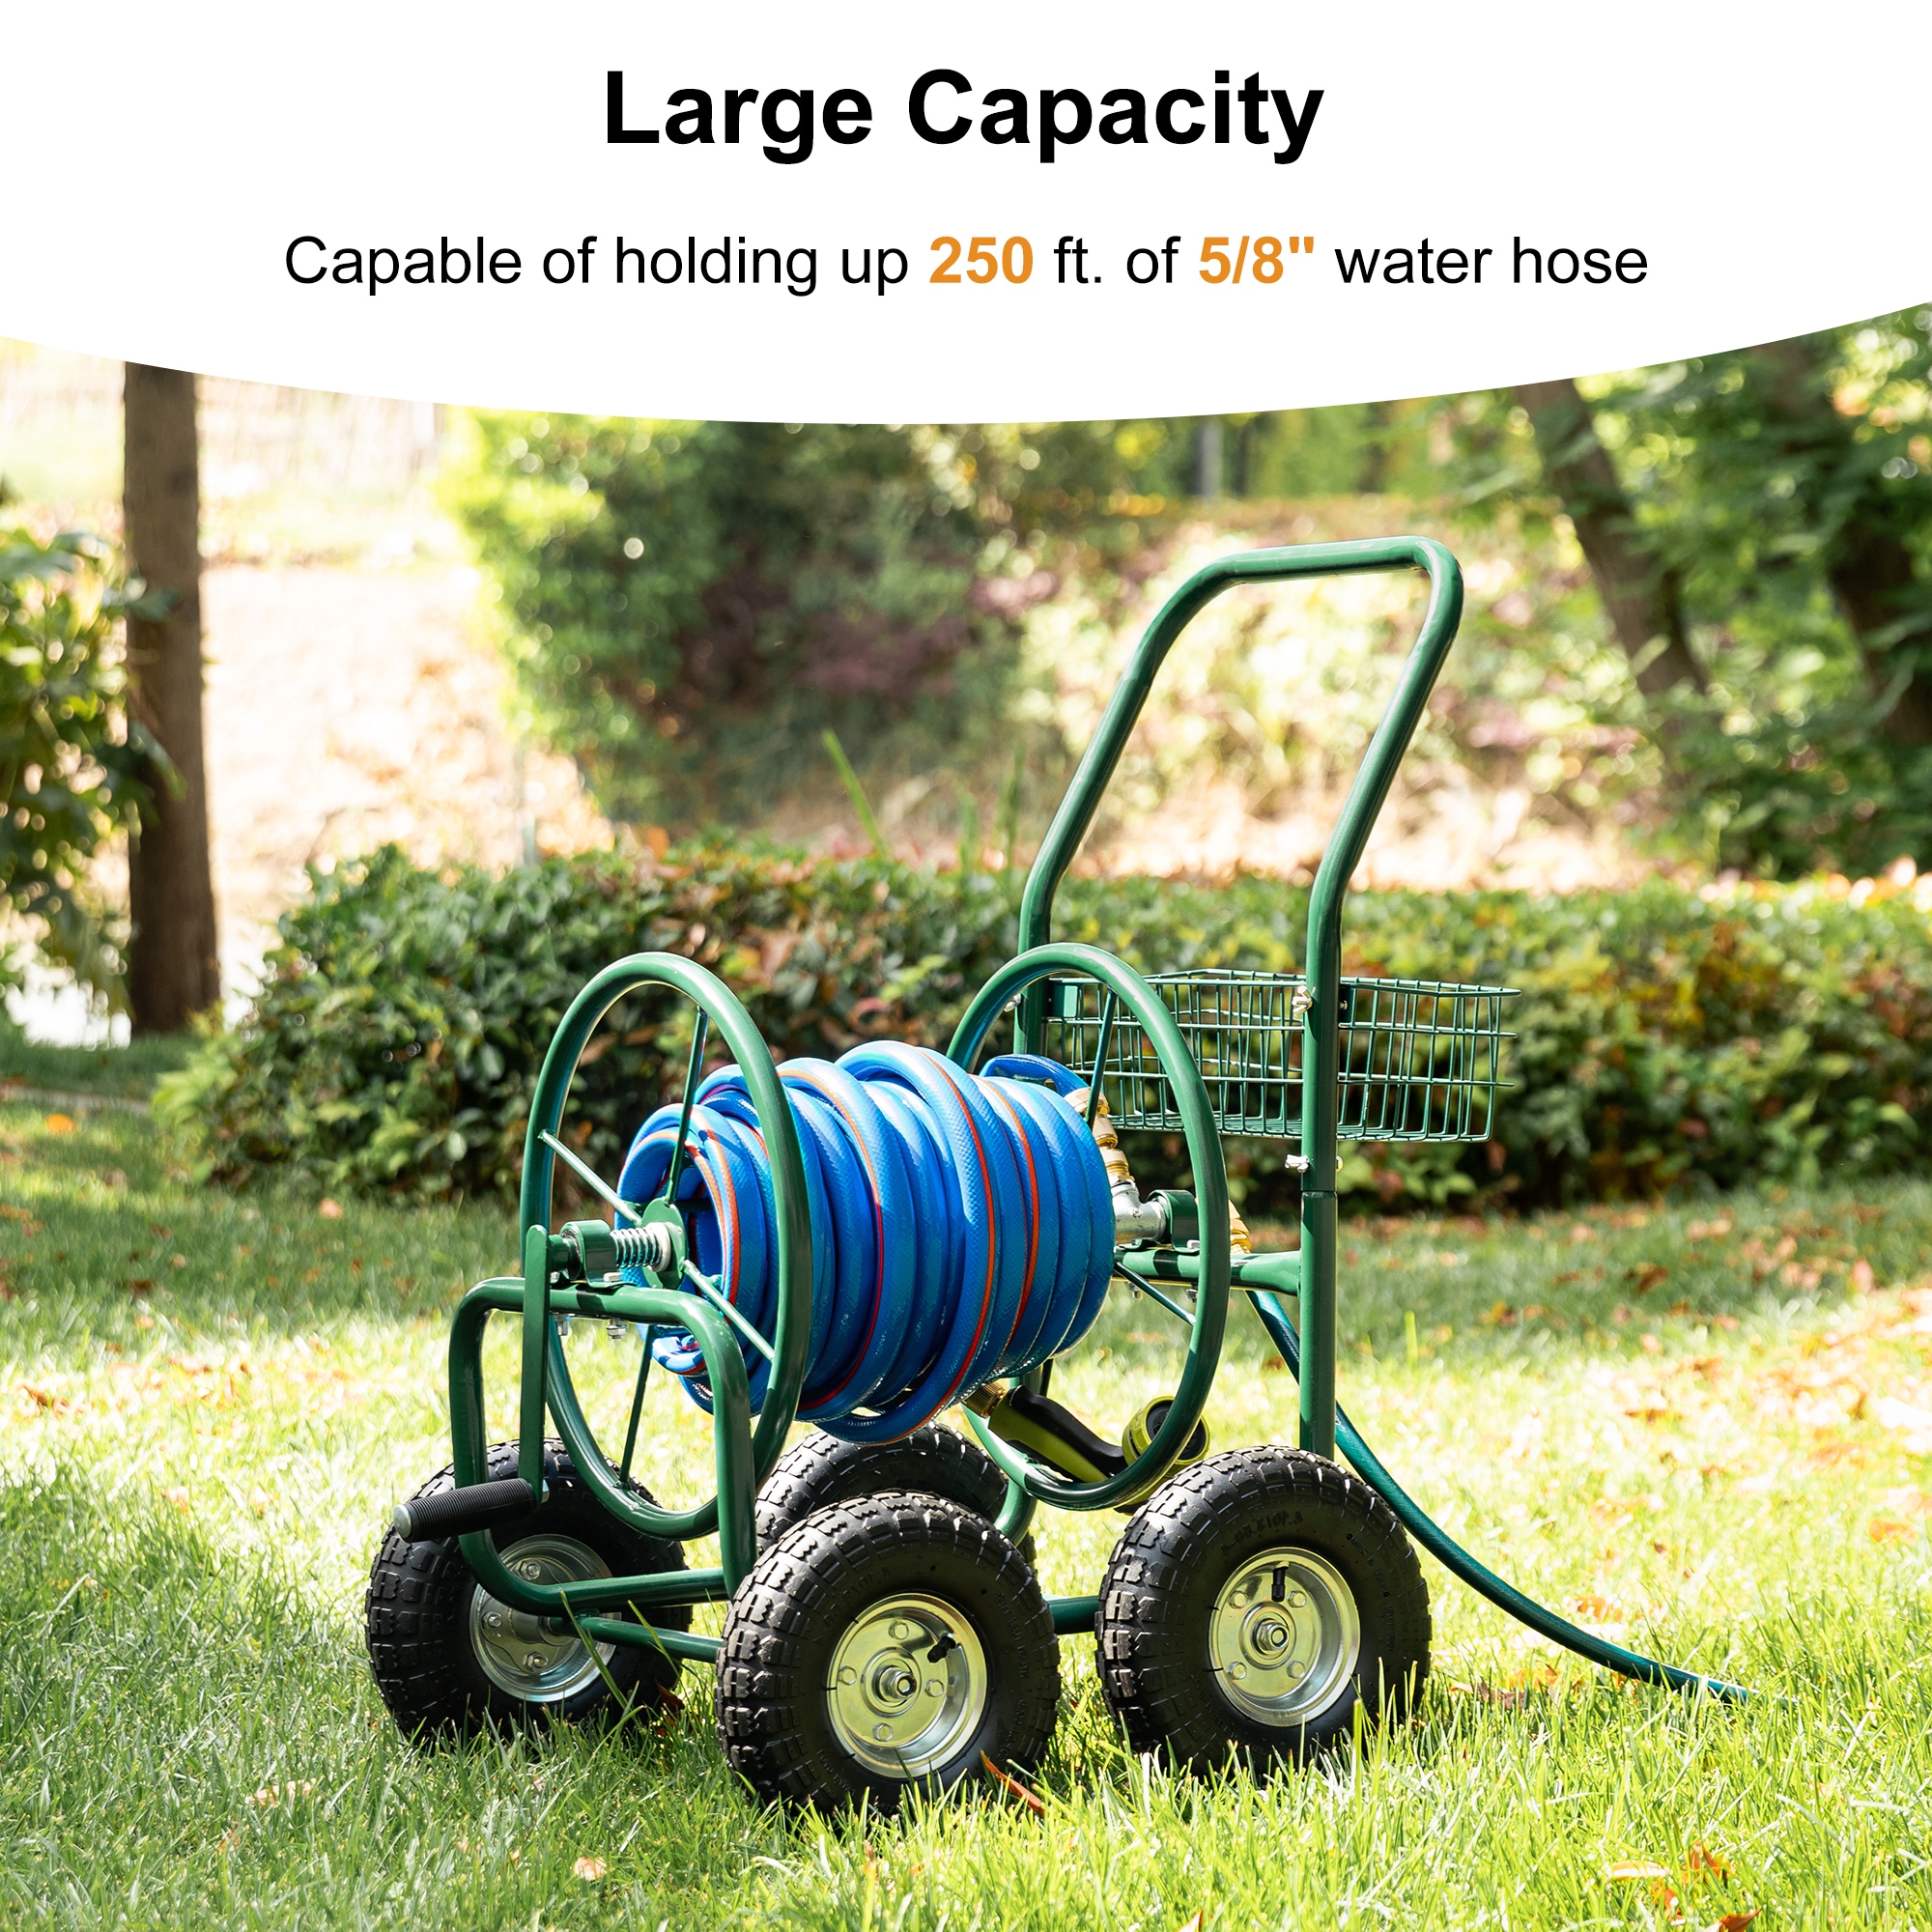 Glitzhome Portable Steel-Painted Green Garden Hose Reel Cart, Fits 5/8-in  Hose, Manual Operation, 250ft Capacity, Plastic Reel Material